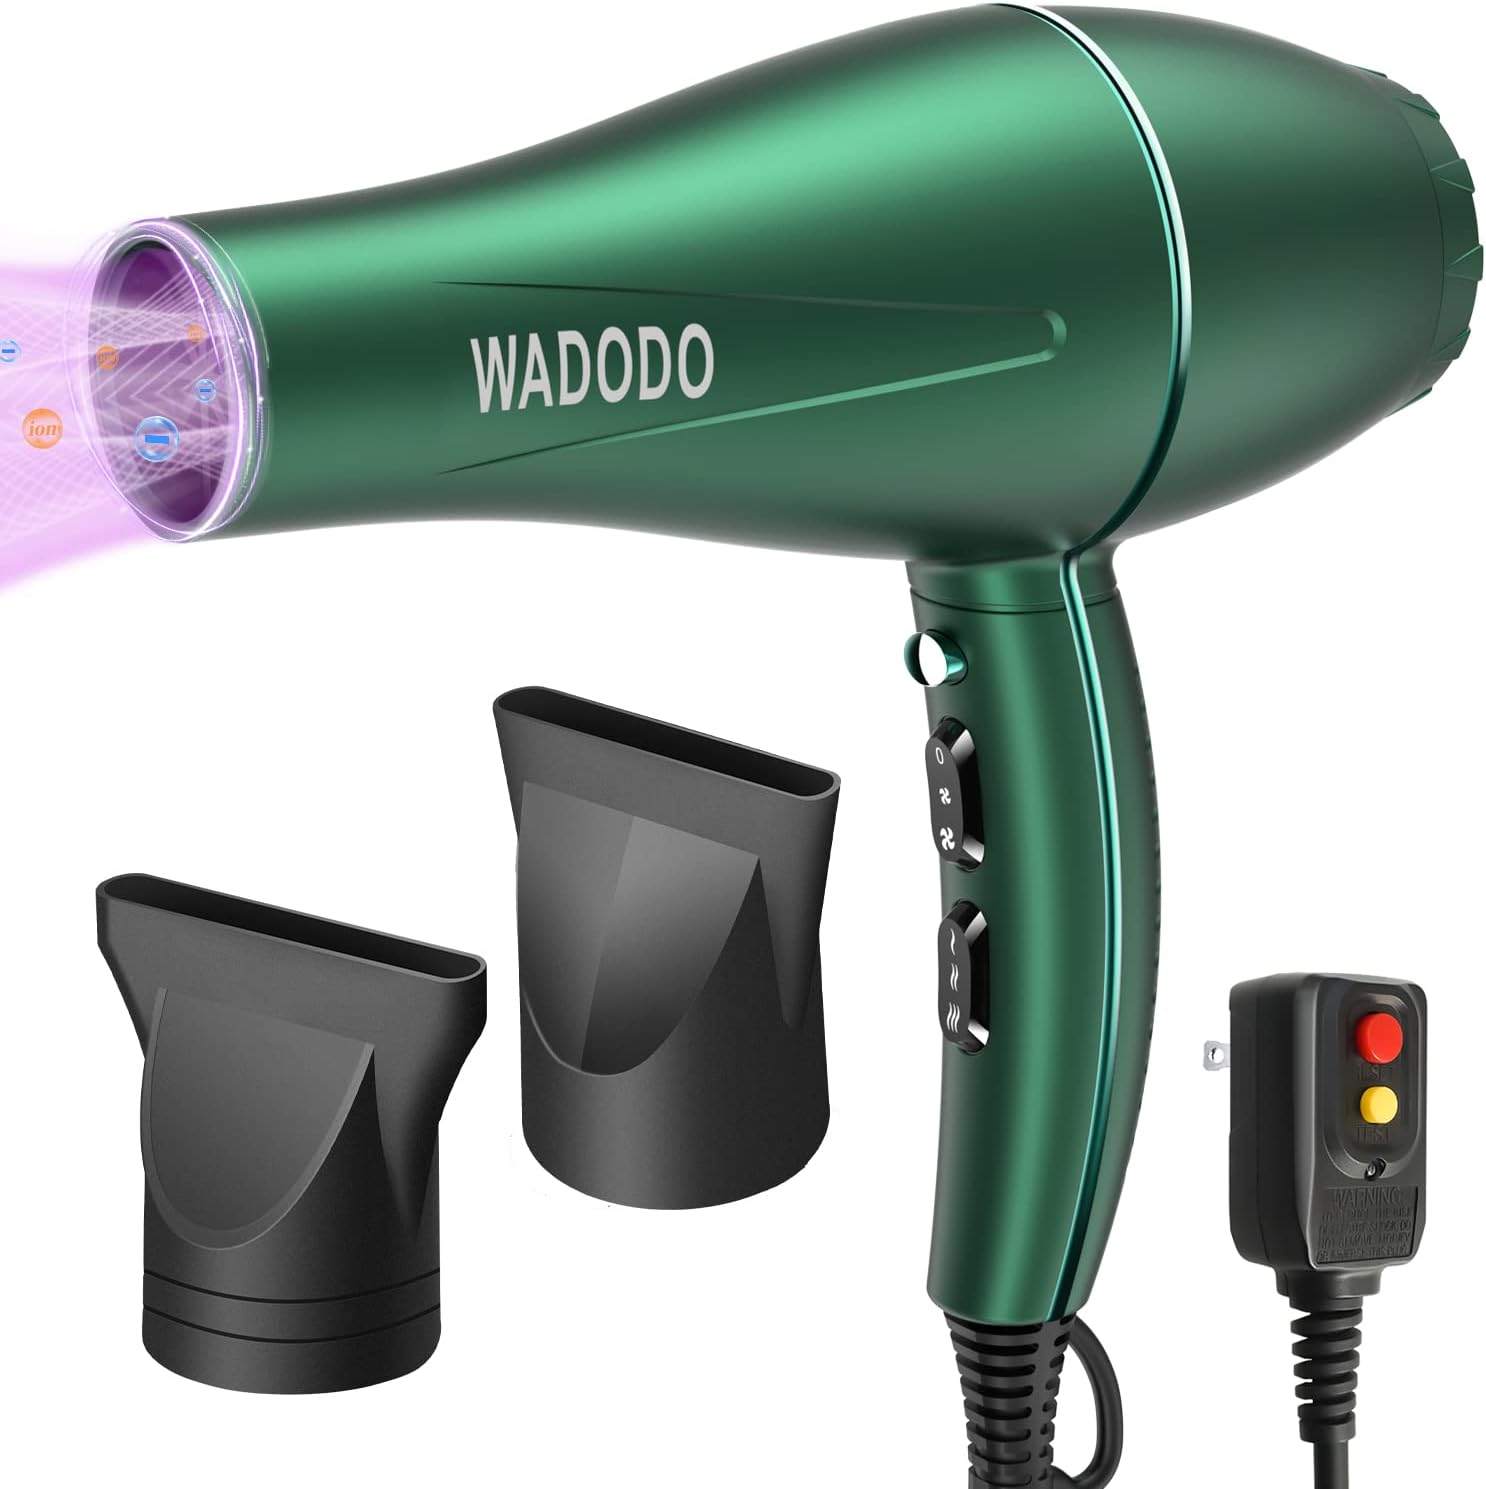 Ionic Hair Dryer, 2200W Professional Blow Dryer Fast Drying Travel Hair Dryer, AC Motor Constant Temperature Low Noise Ion Hair Dryers Curly Hair Care Hairdryer Blowdryer for Women Men(Green)